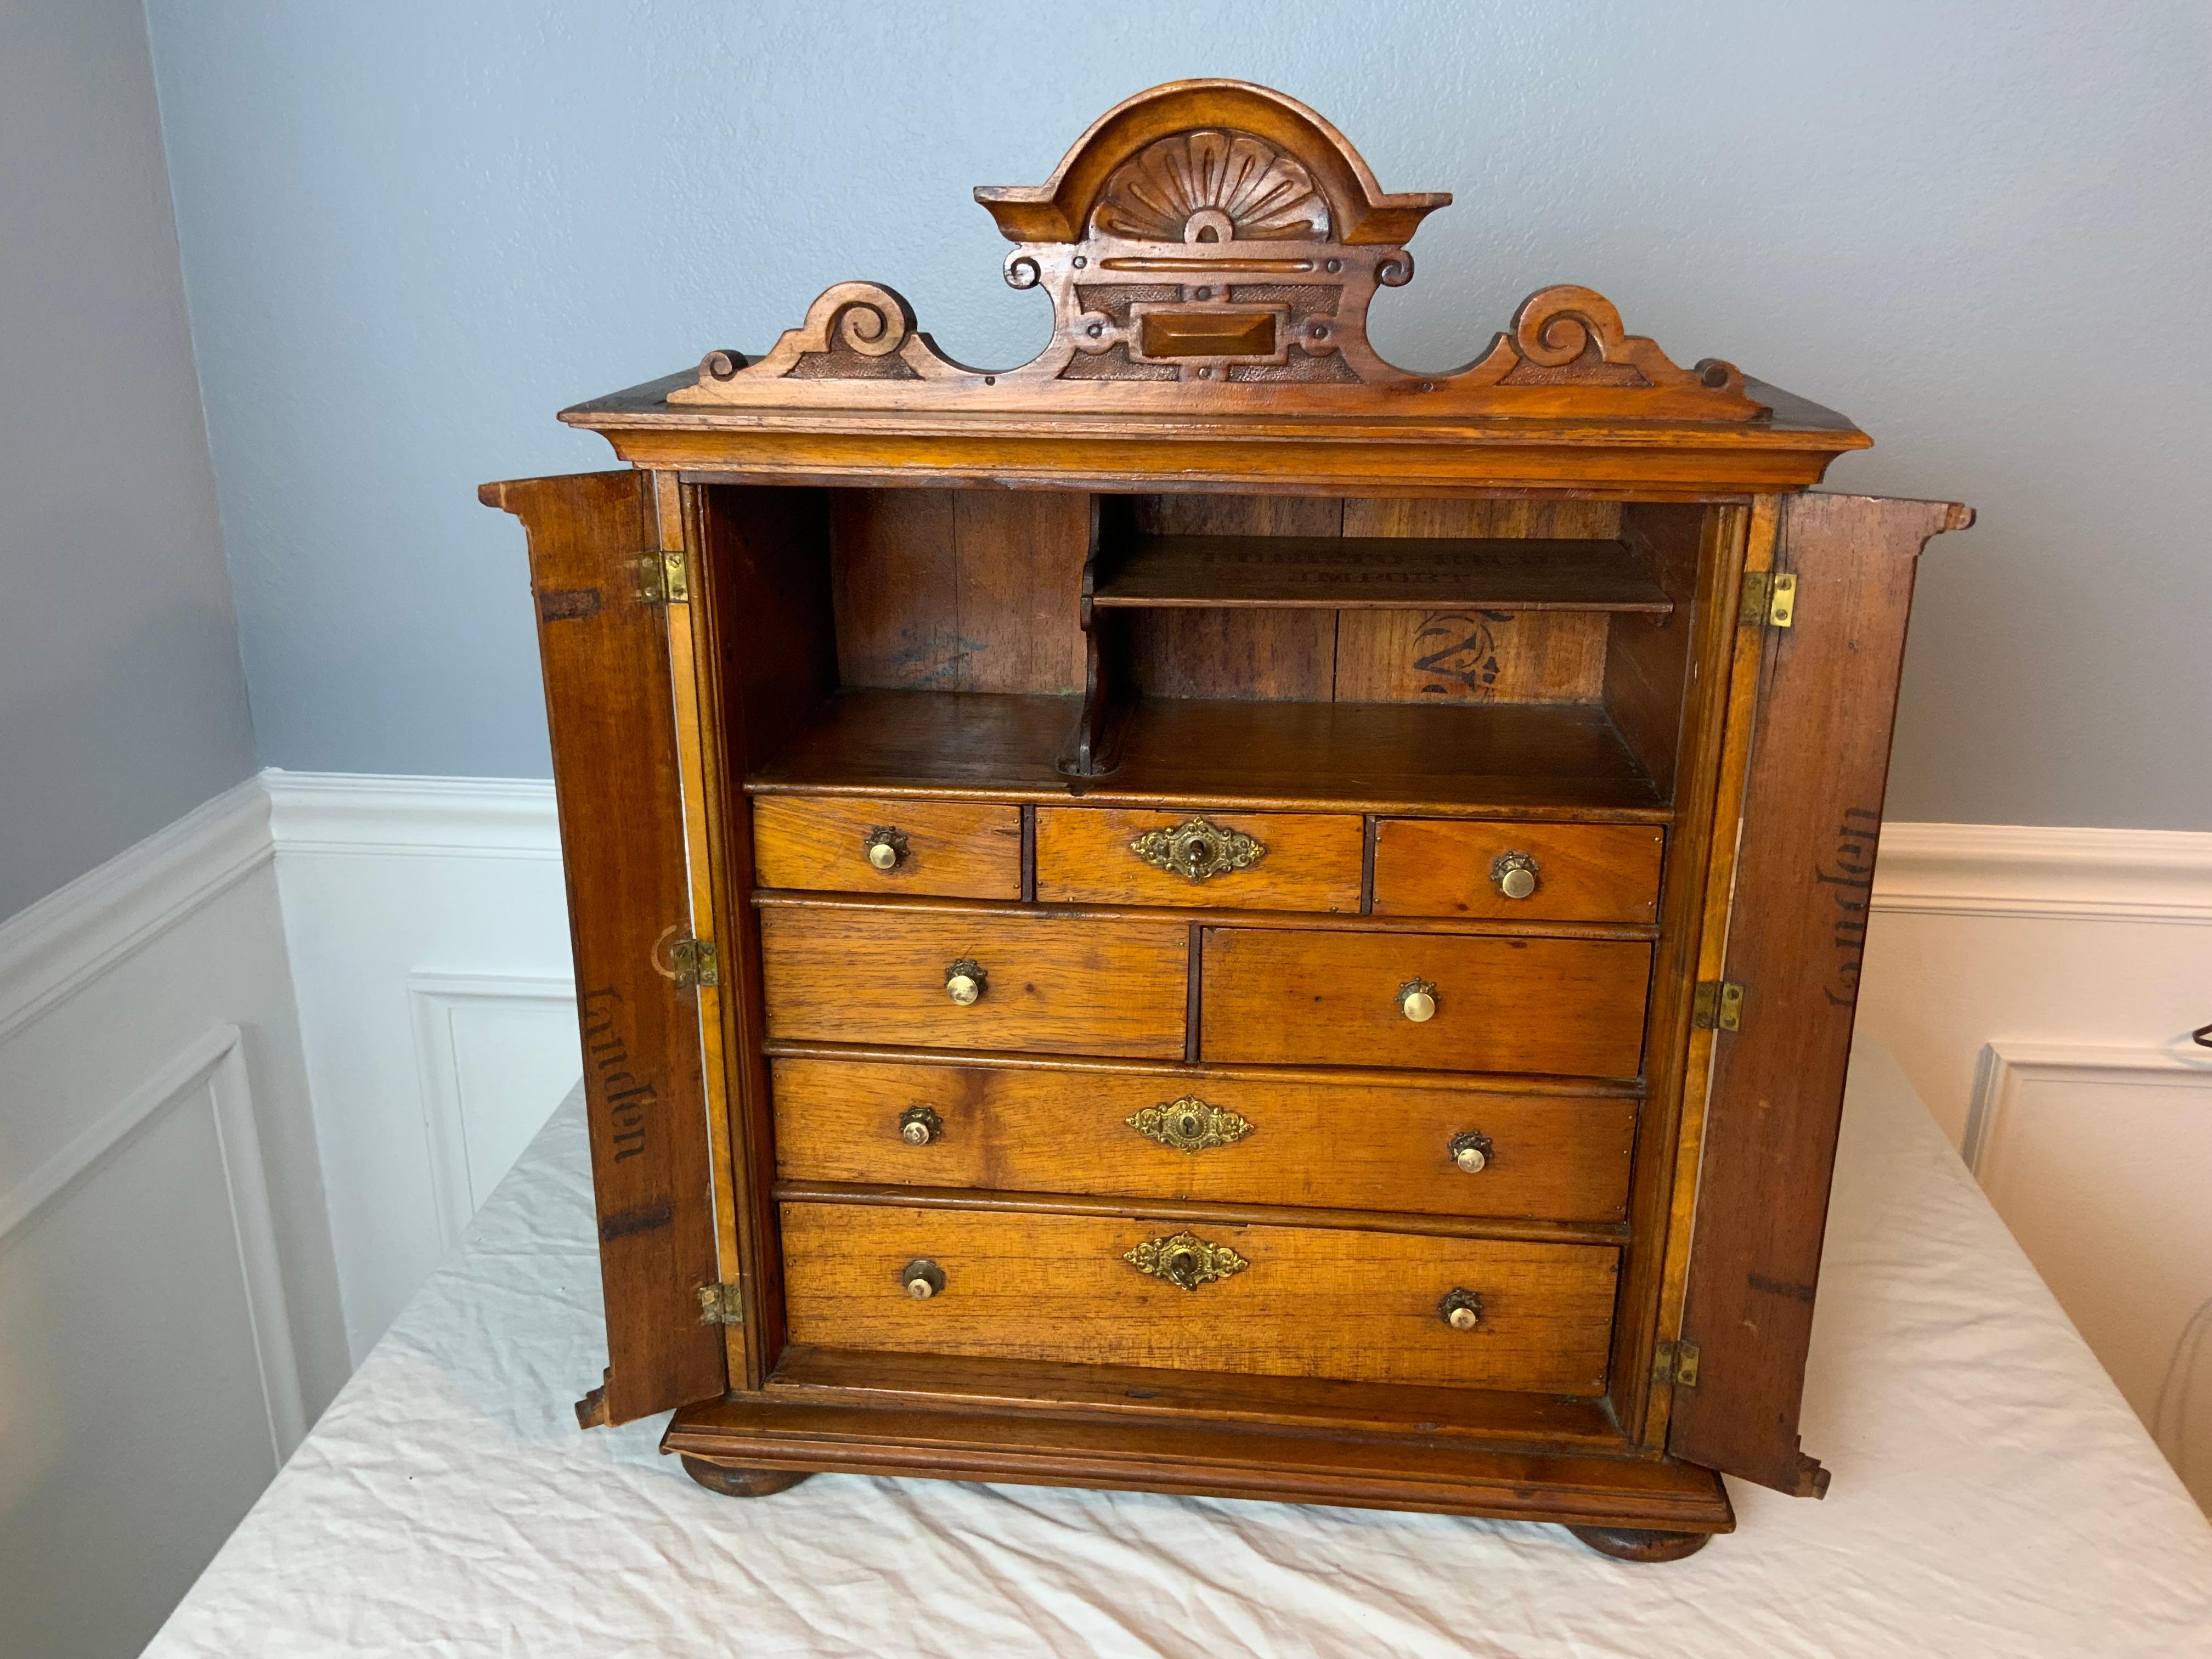 A very unique Victorian era hand made miniature chest that resembles a larger Victorian lock side chest with the two small pieces on the side that flip open to access the drawers. There is a original hook on the back for hanging it if required. This